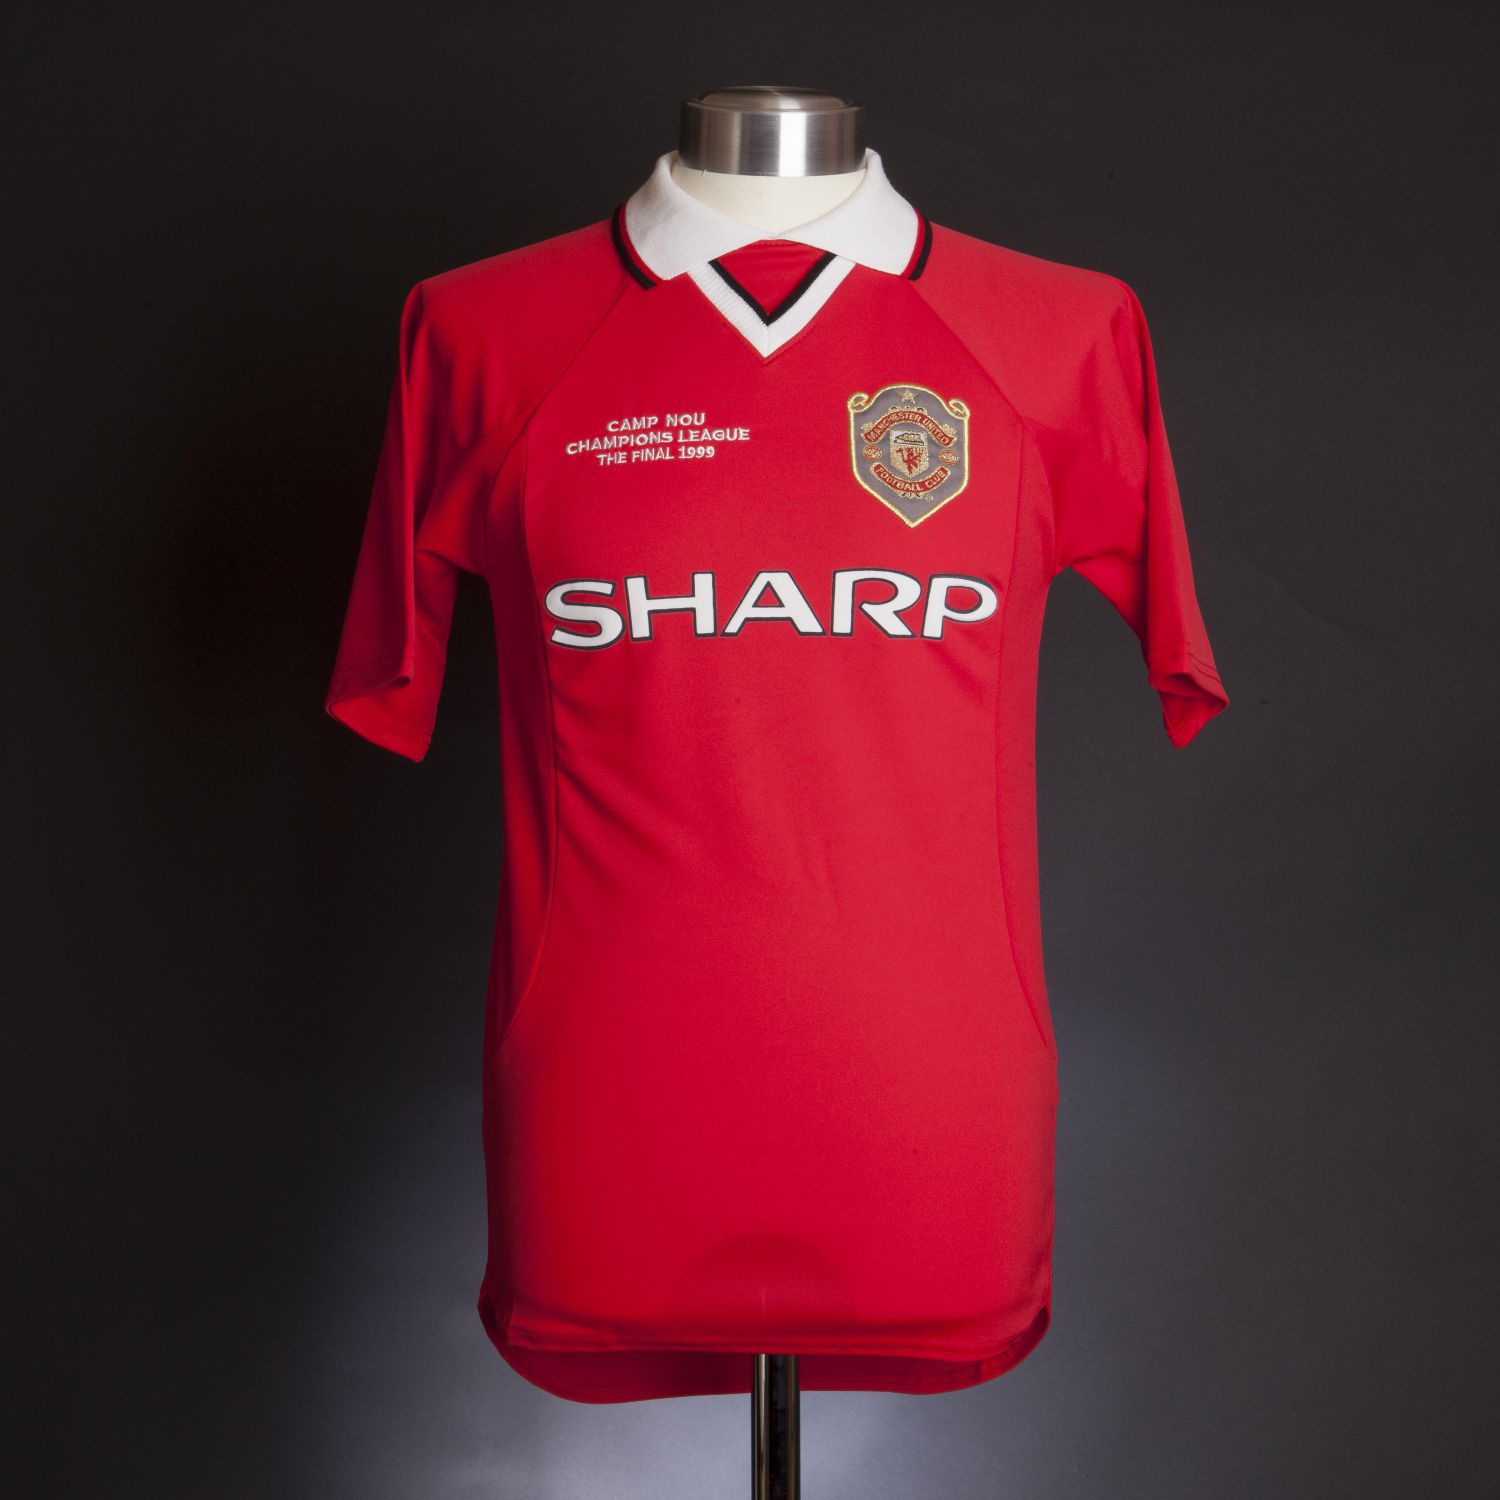 manchester united 1999 jersey for sale